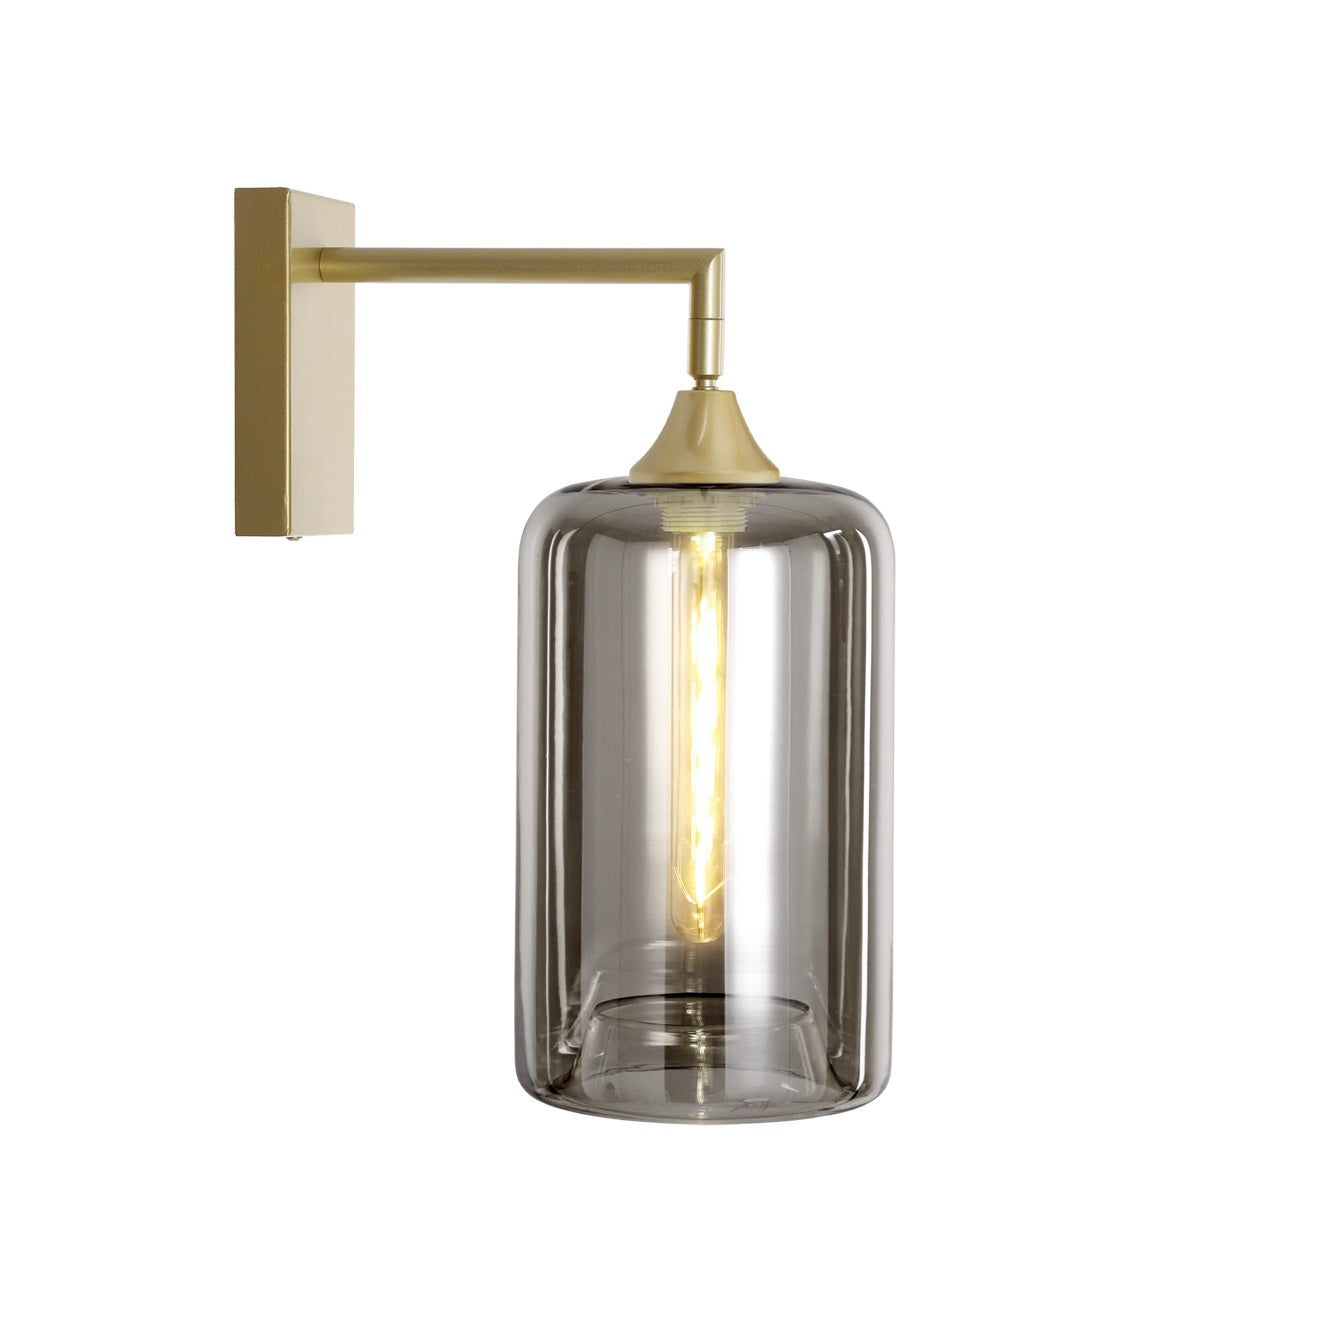 Murano Gold Wall Light with Slim Cylinder glass